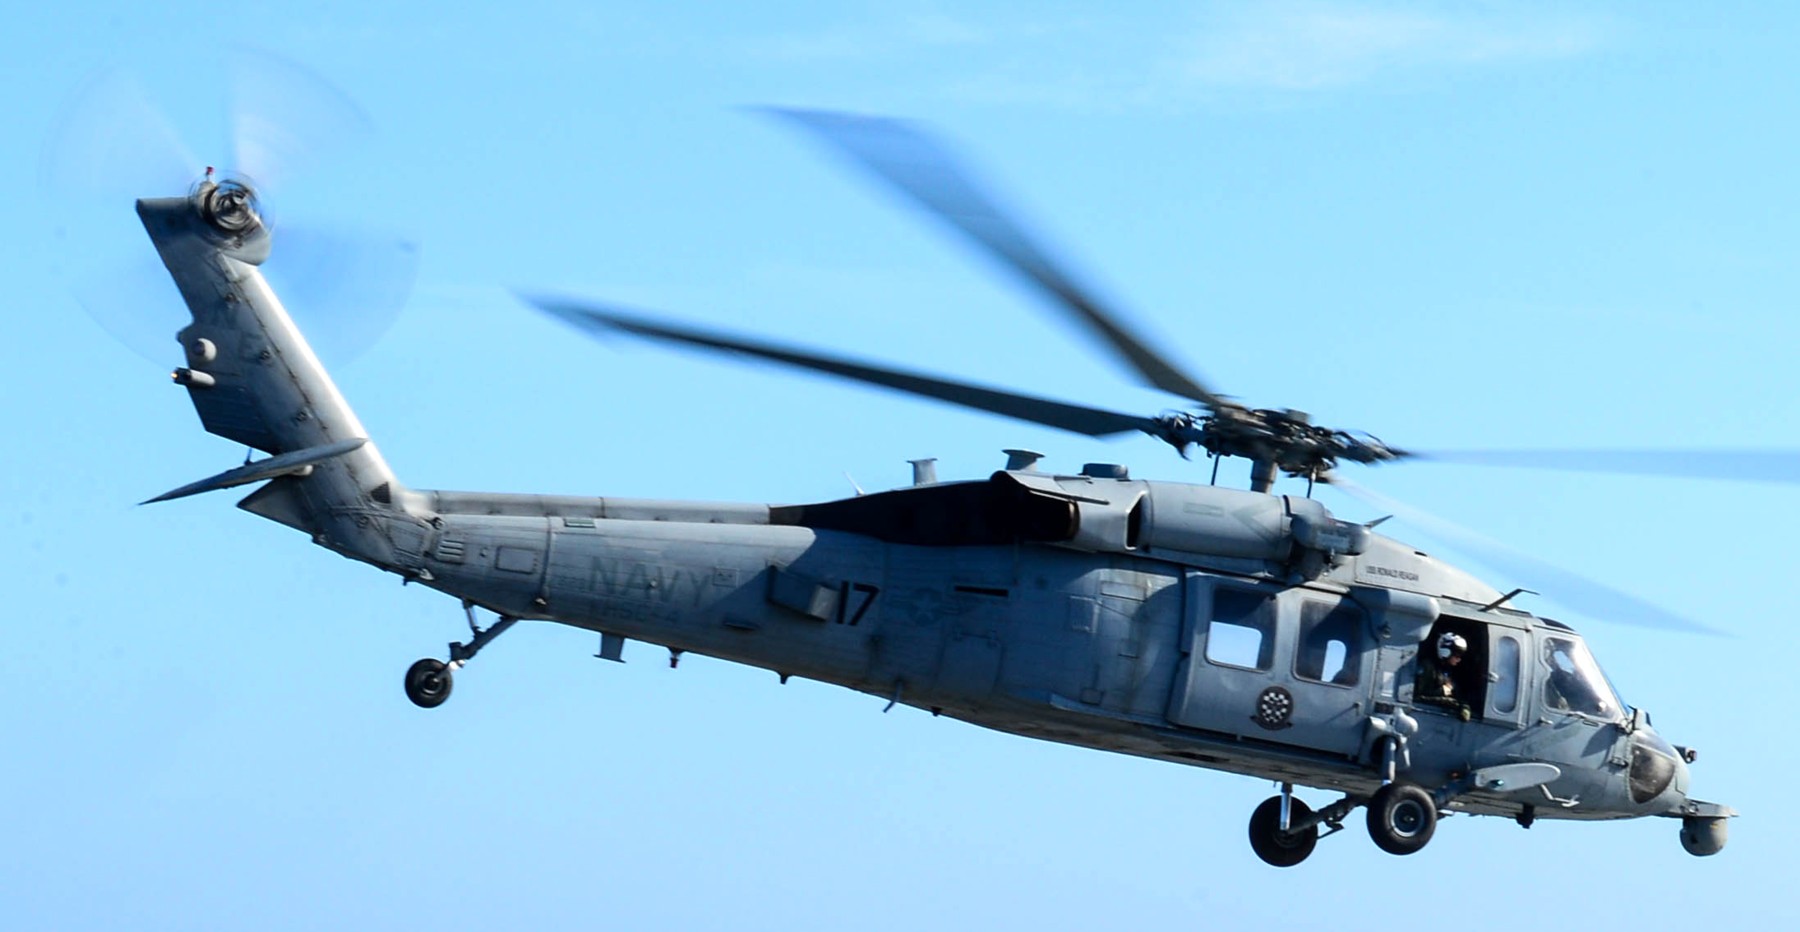 hsc-4 black knights helicopter sea combat squadron us navy mh-60s seahawk 2014 43